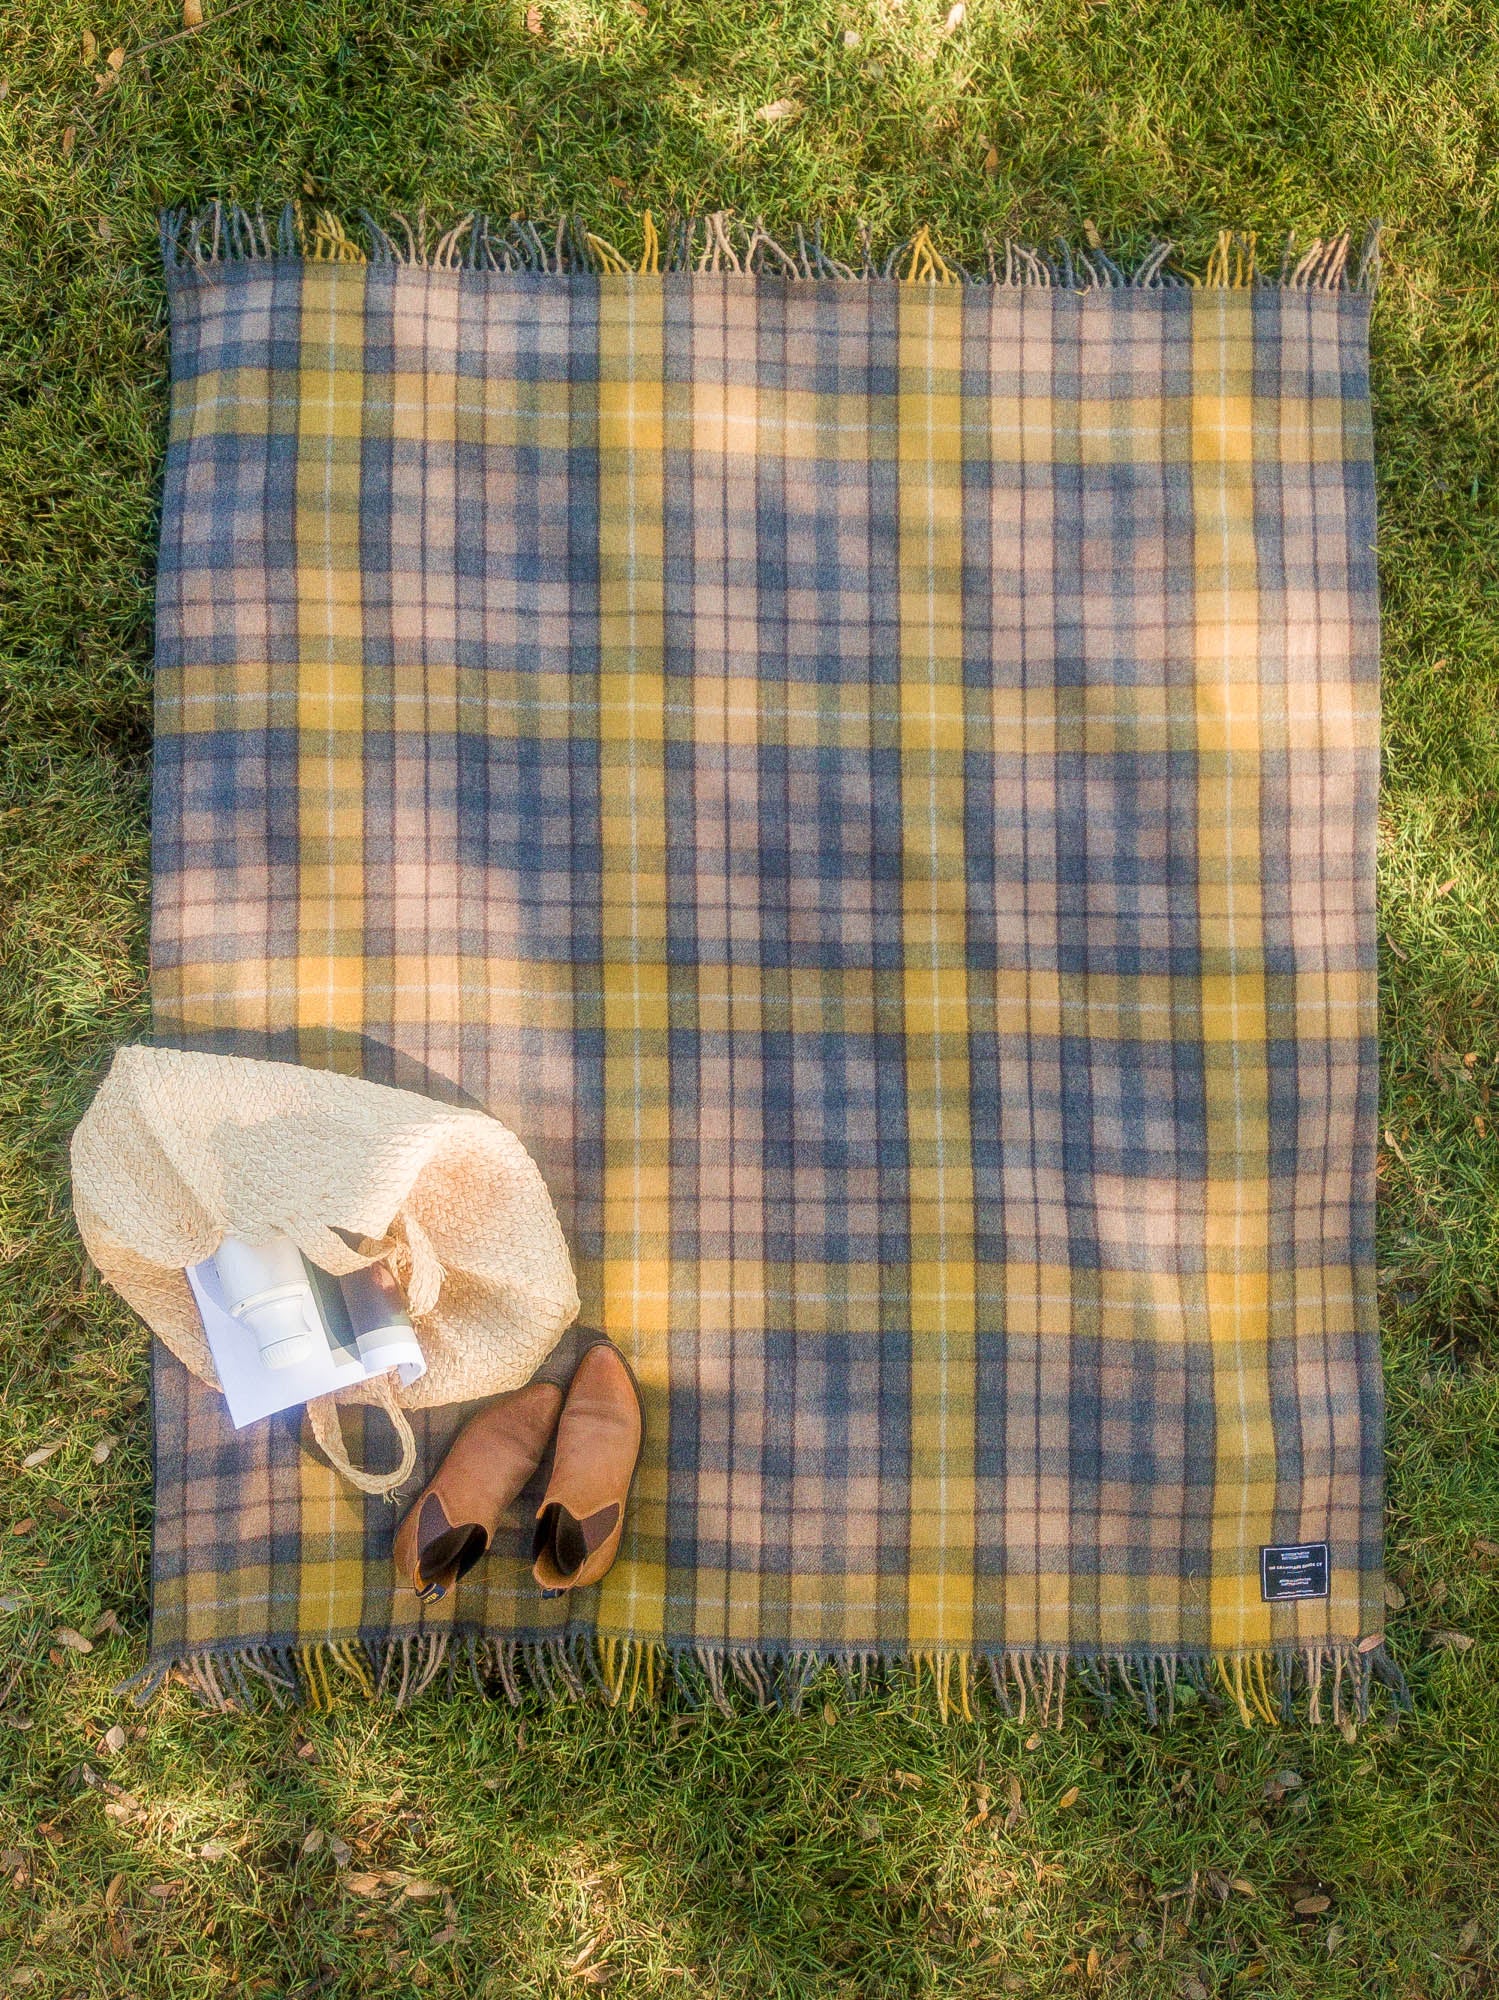 The Grampian Goods Co - HERITAGE COLLECTION Recycled Wool Scottish Tartan Blanket: Gold